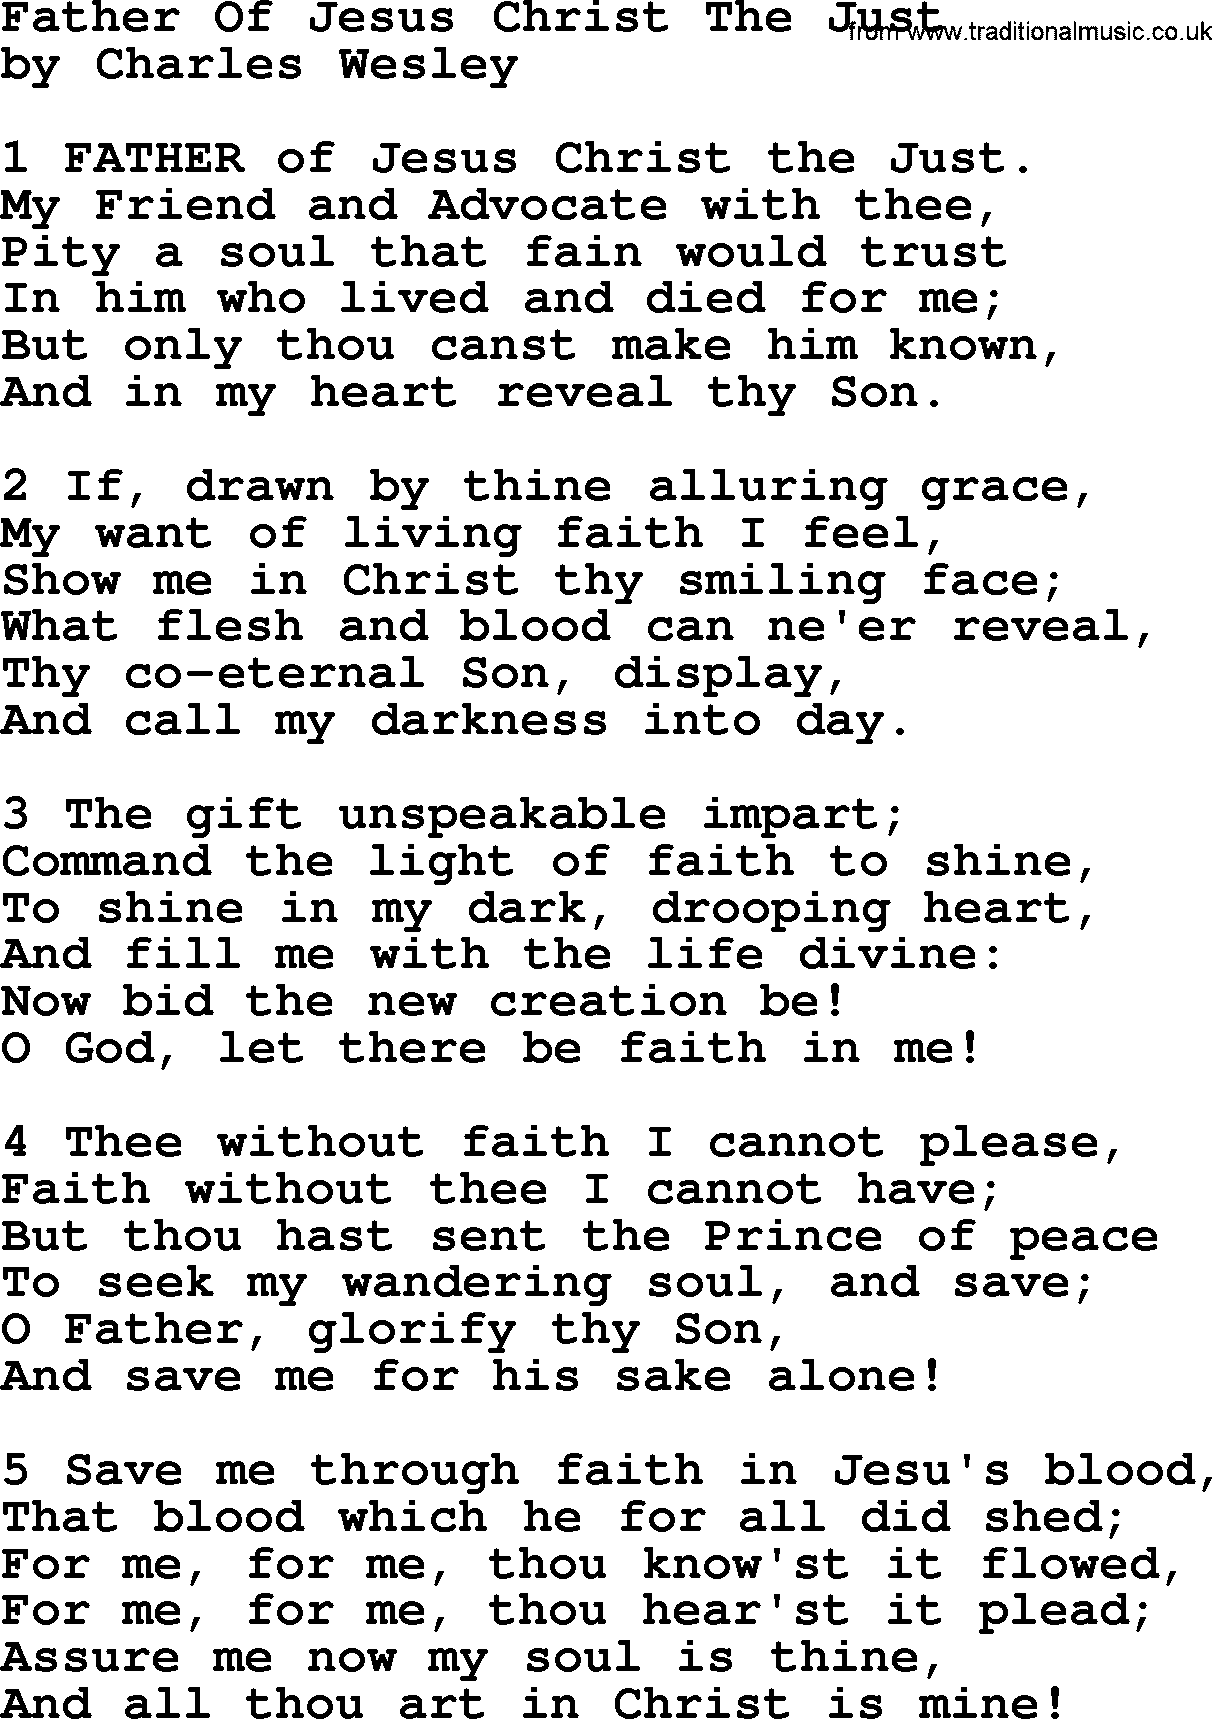 Charles Wesley hymn: Father Of Jesus Christ The Just, lyrics